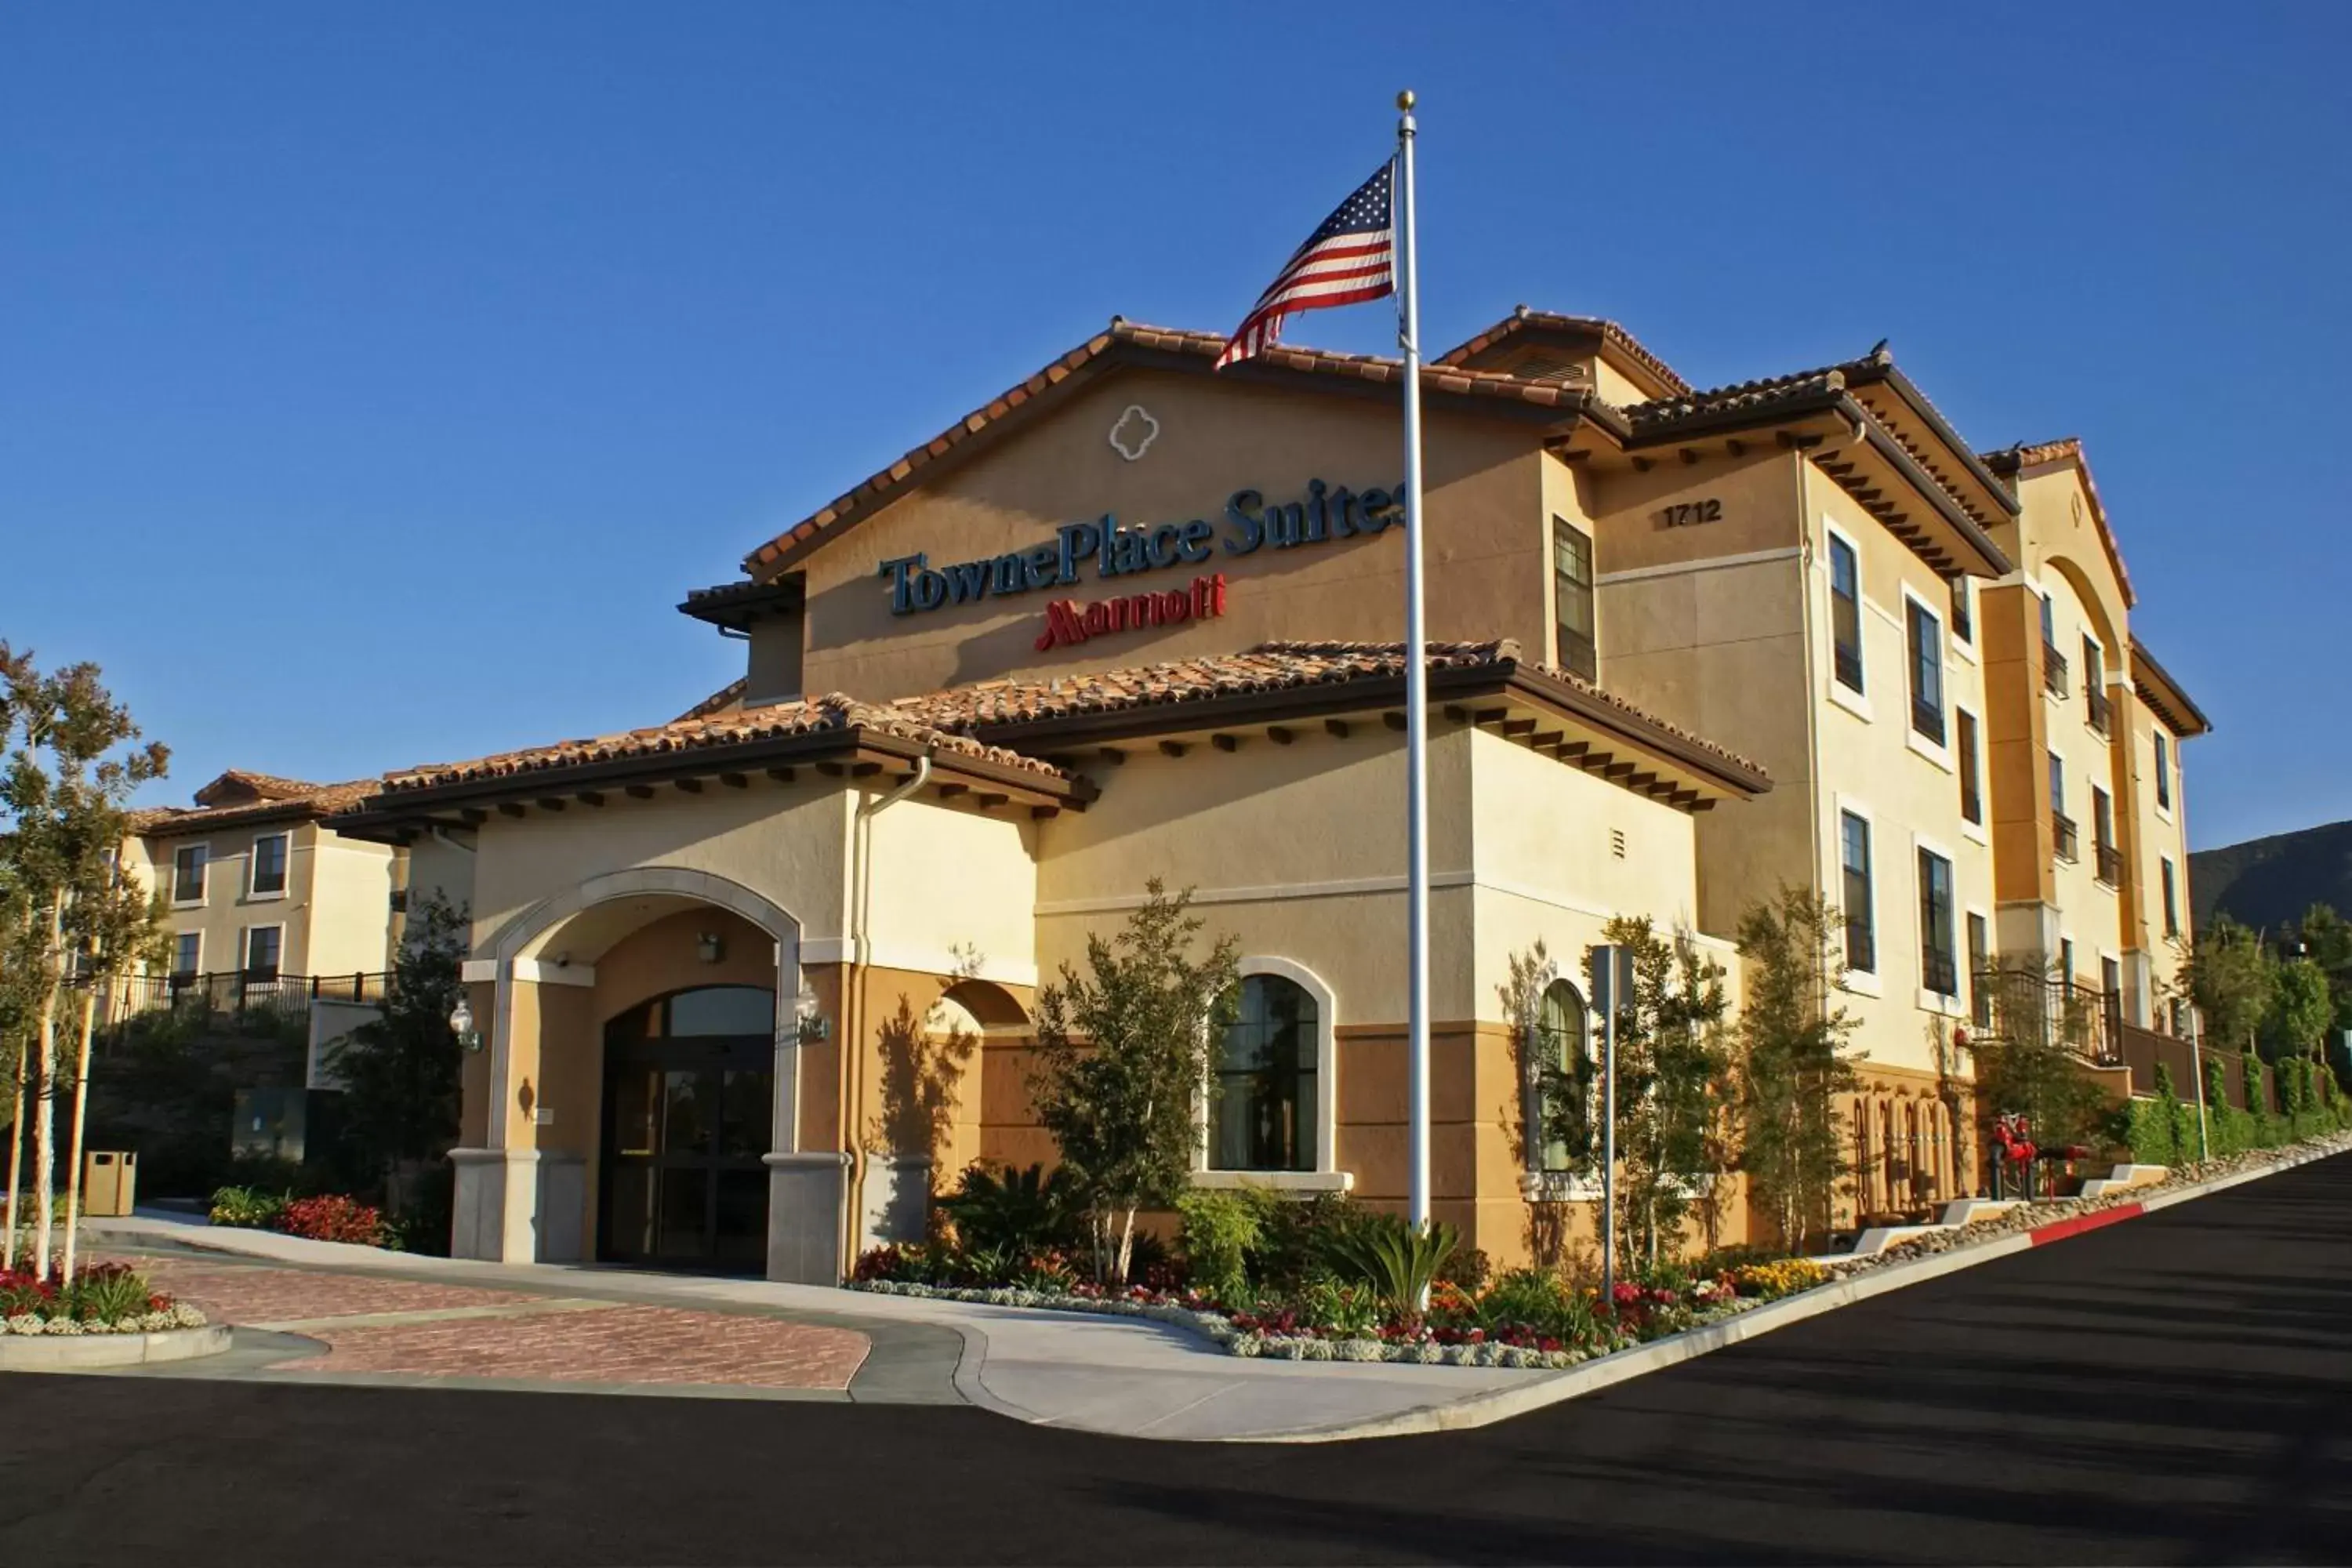 Property Building in TownePlace Suites Thousand Oaks Ventura County